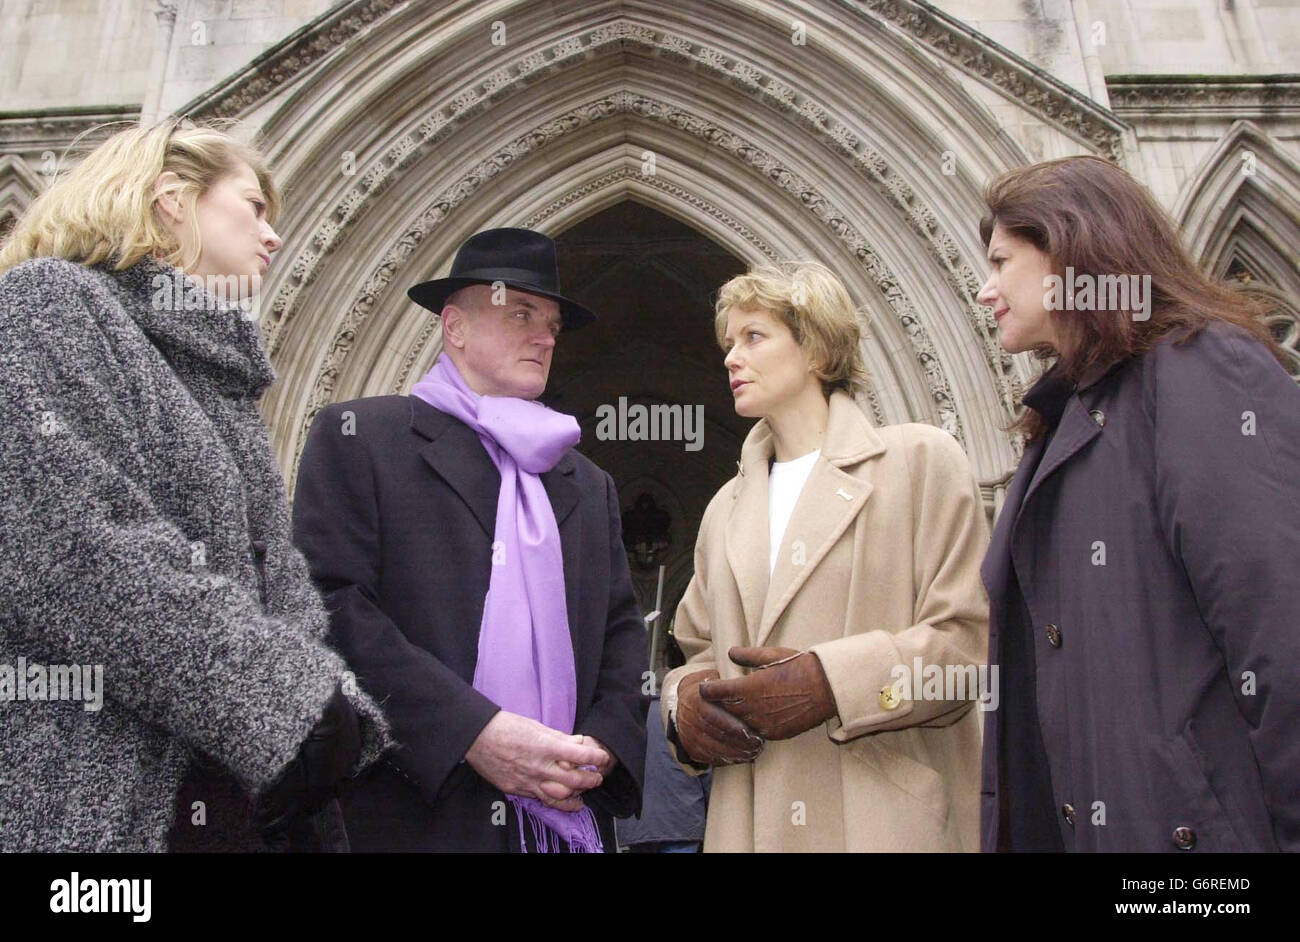 Actresses Jenny Seagrove (2nd right), Tracy Childs (left), Belinda Lang and writer Gordon Newman stand in front of the Royal Courts of Justice in central London, as they join leading trade bodies within the health food industry to oppose the implementation of the EU Food Supplements Directive. The directive would see the banning of thousands of vitamins and food supplements from sale in British health food stores, affecting millions of consumers. The bodies are asking a judge to refer the challenge to the European Court of Justice in Luxembourg, which alone has the power to quash an EU Stock Photo